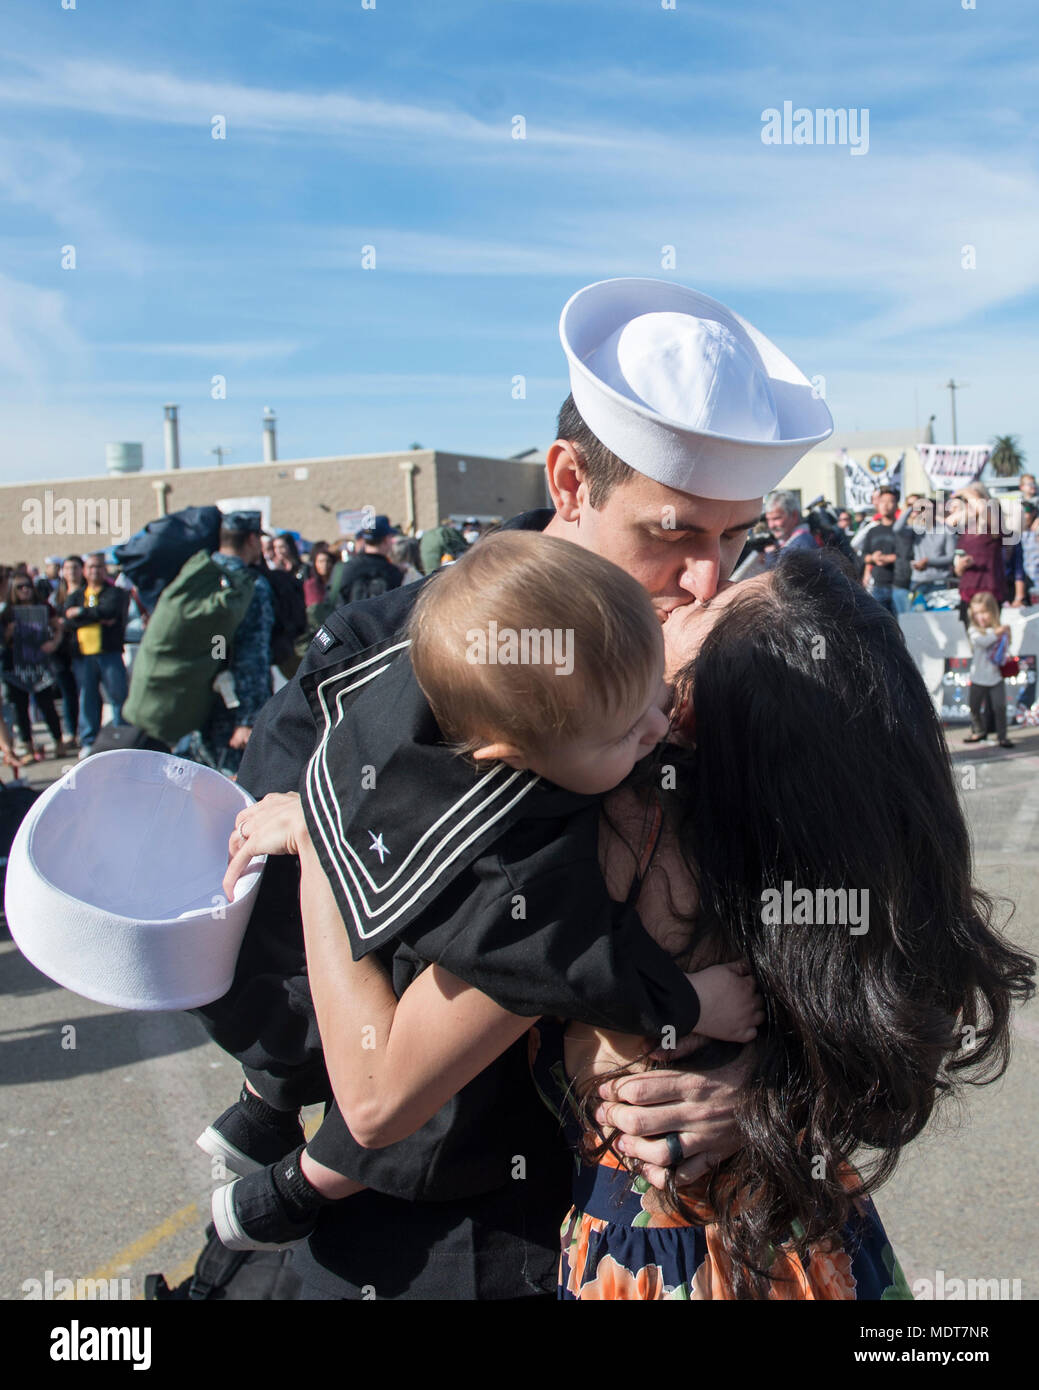 171205-N-BN355-0257  SAN DIEGO (Dec. 05, 2017) Aviation Electrician's Mate 1st Class Nathaniel Klein embraces his wife and son after disembarking from USS Nimitz. The Nimitz Carrier Strike Group is on a regularly scheduled deployment to the Western Pacific. The U.S. Navy has patrolled the Indo-Asia-Pacific region routinely for more than 70 years, prompting peace security. (U.S. Navy photo by Mass Communication Specialist Seaman Apprentice Jailene Casso/Released) Stock Photo